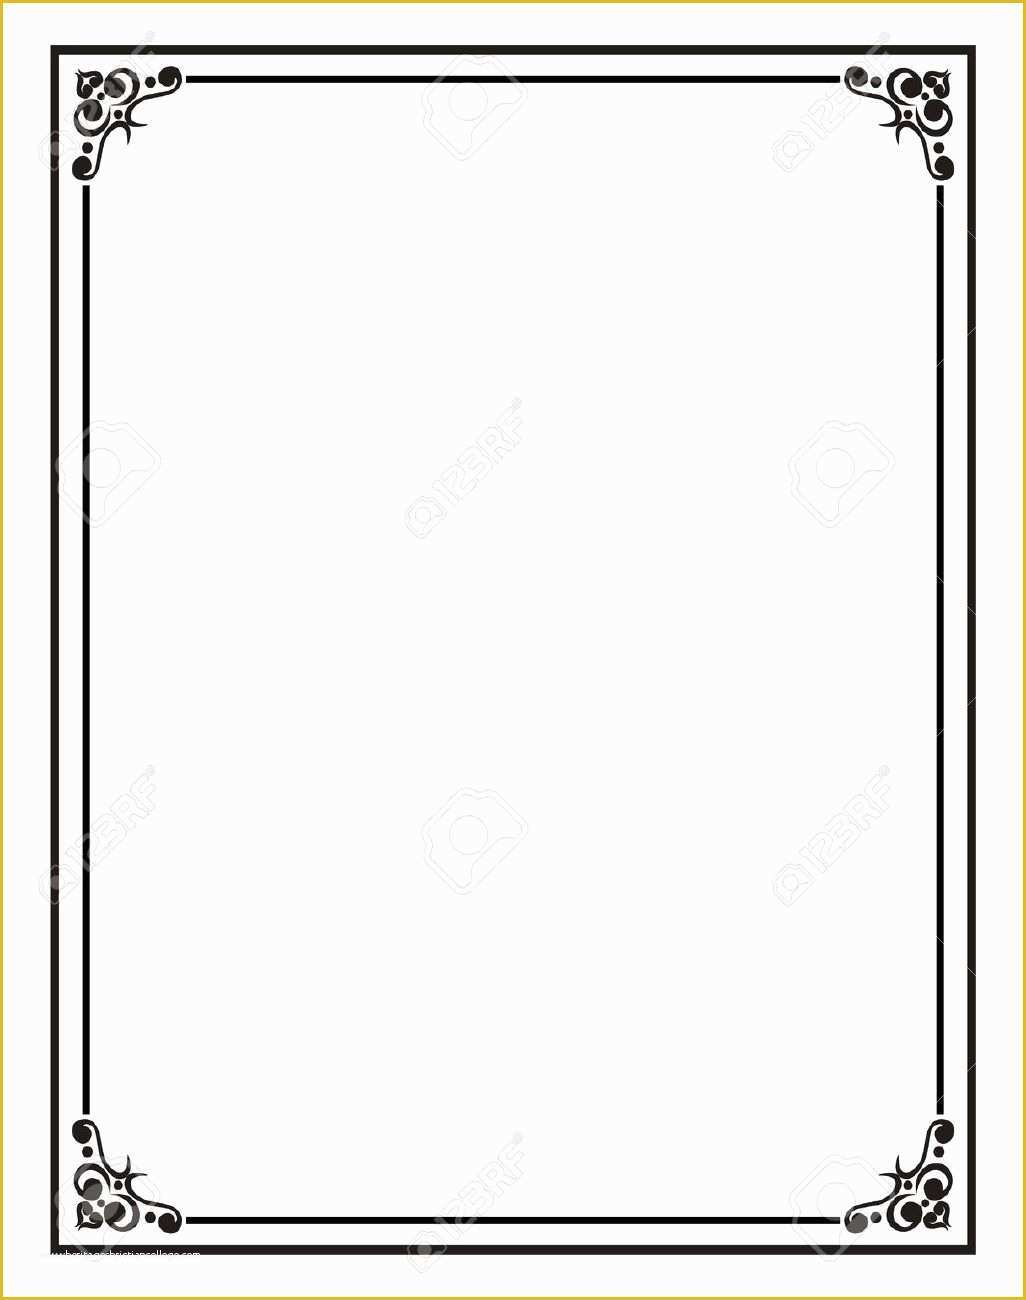 Picture Frame Templates Free Of Home Fice Certificate Border Stock S